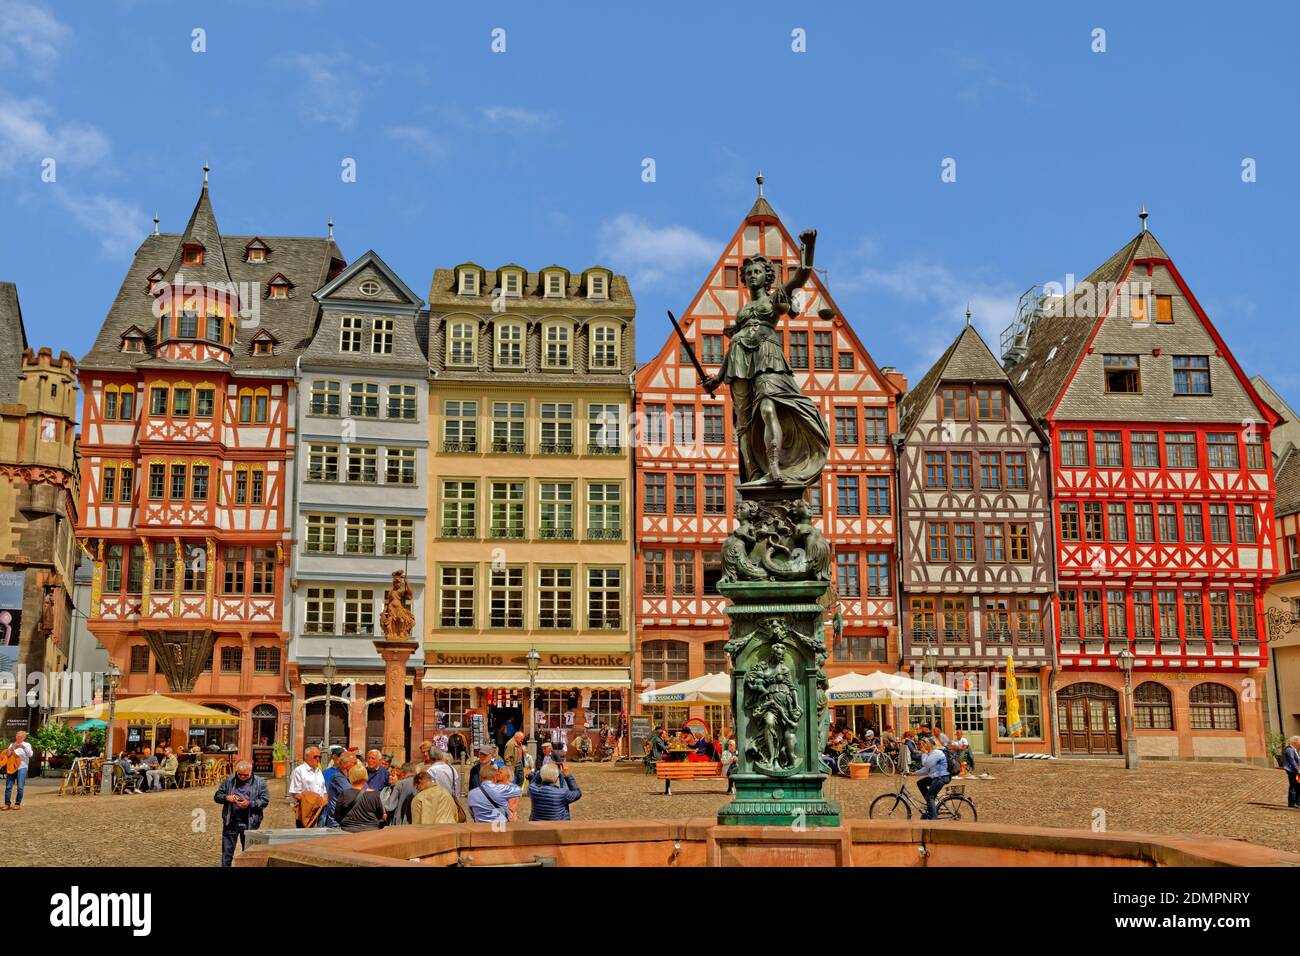 Half timbered buildings and the Lady Justice statue on Römerberg in the old town of Frankfurt am Main, Hesse, Germany. Stock Photo